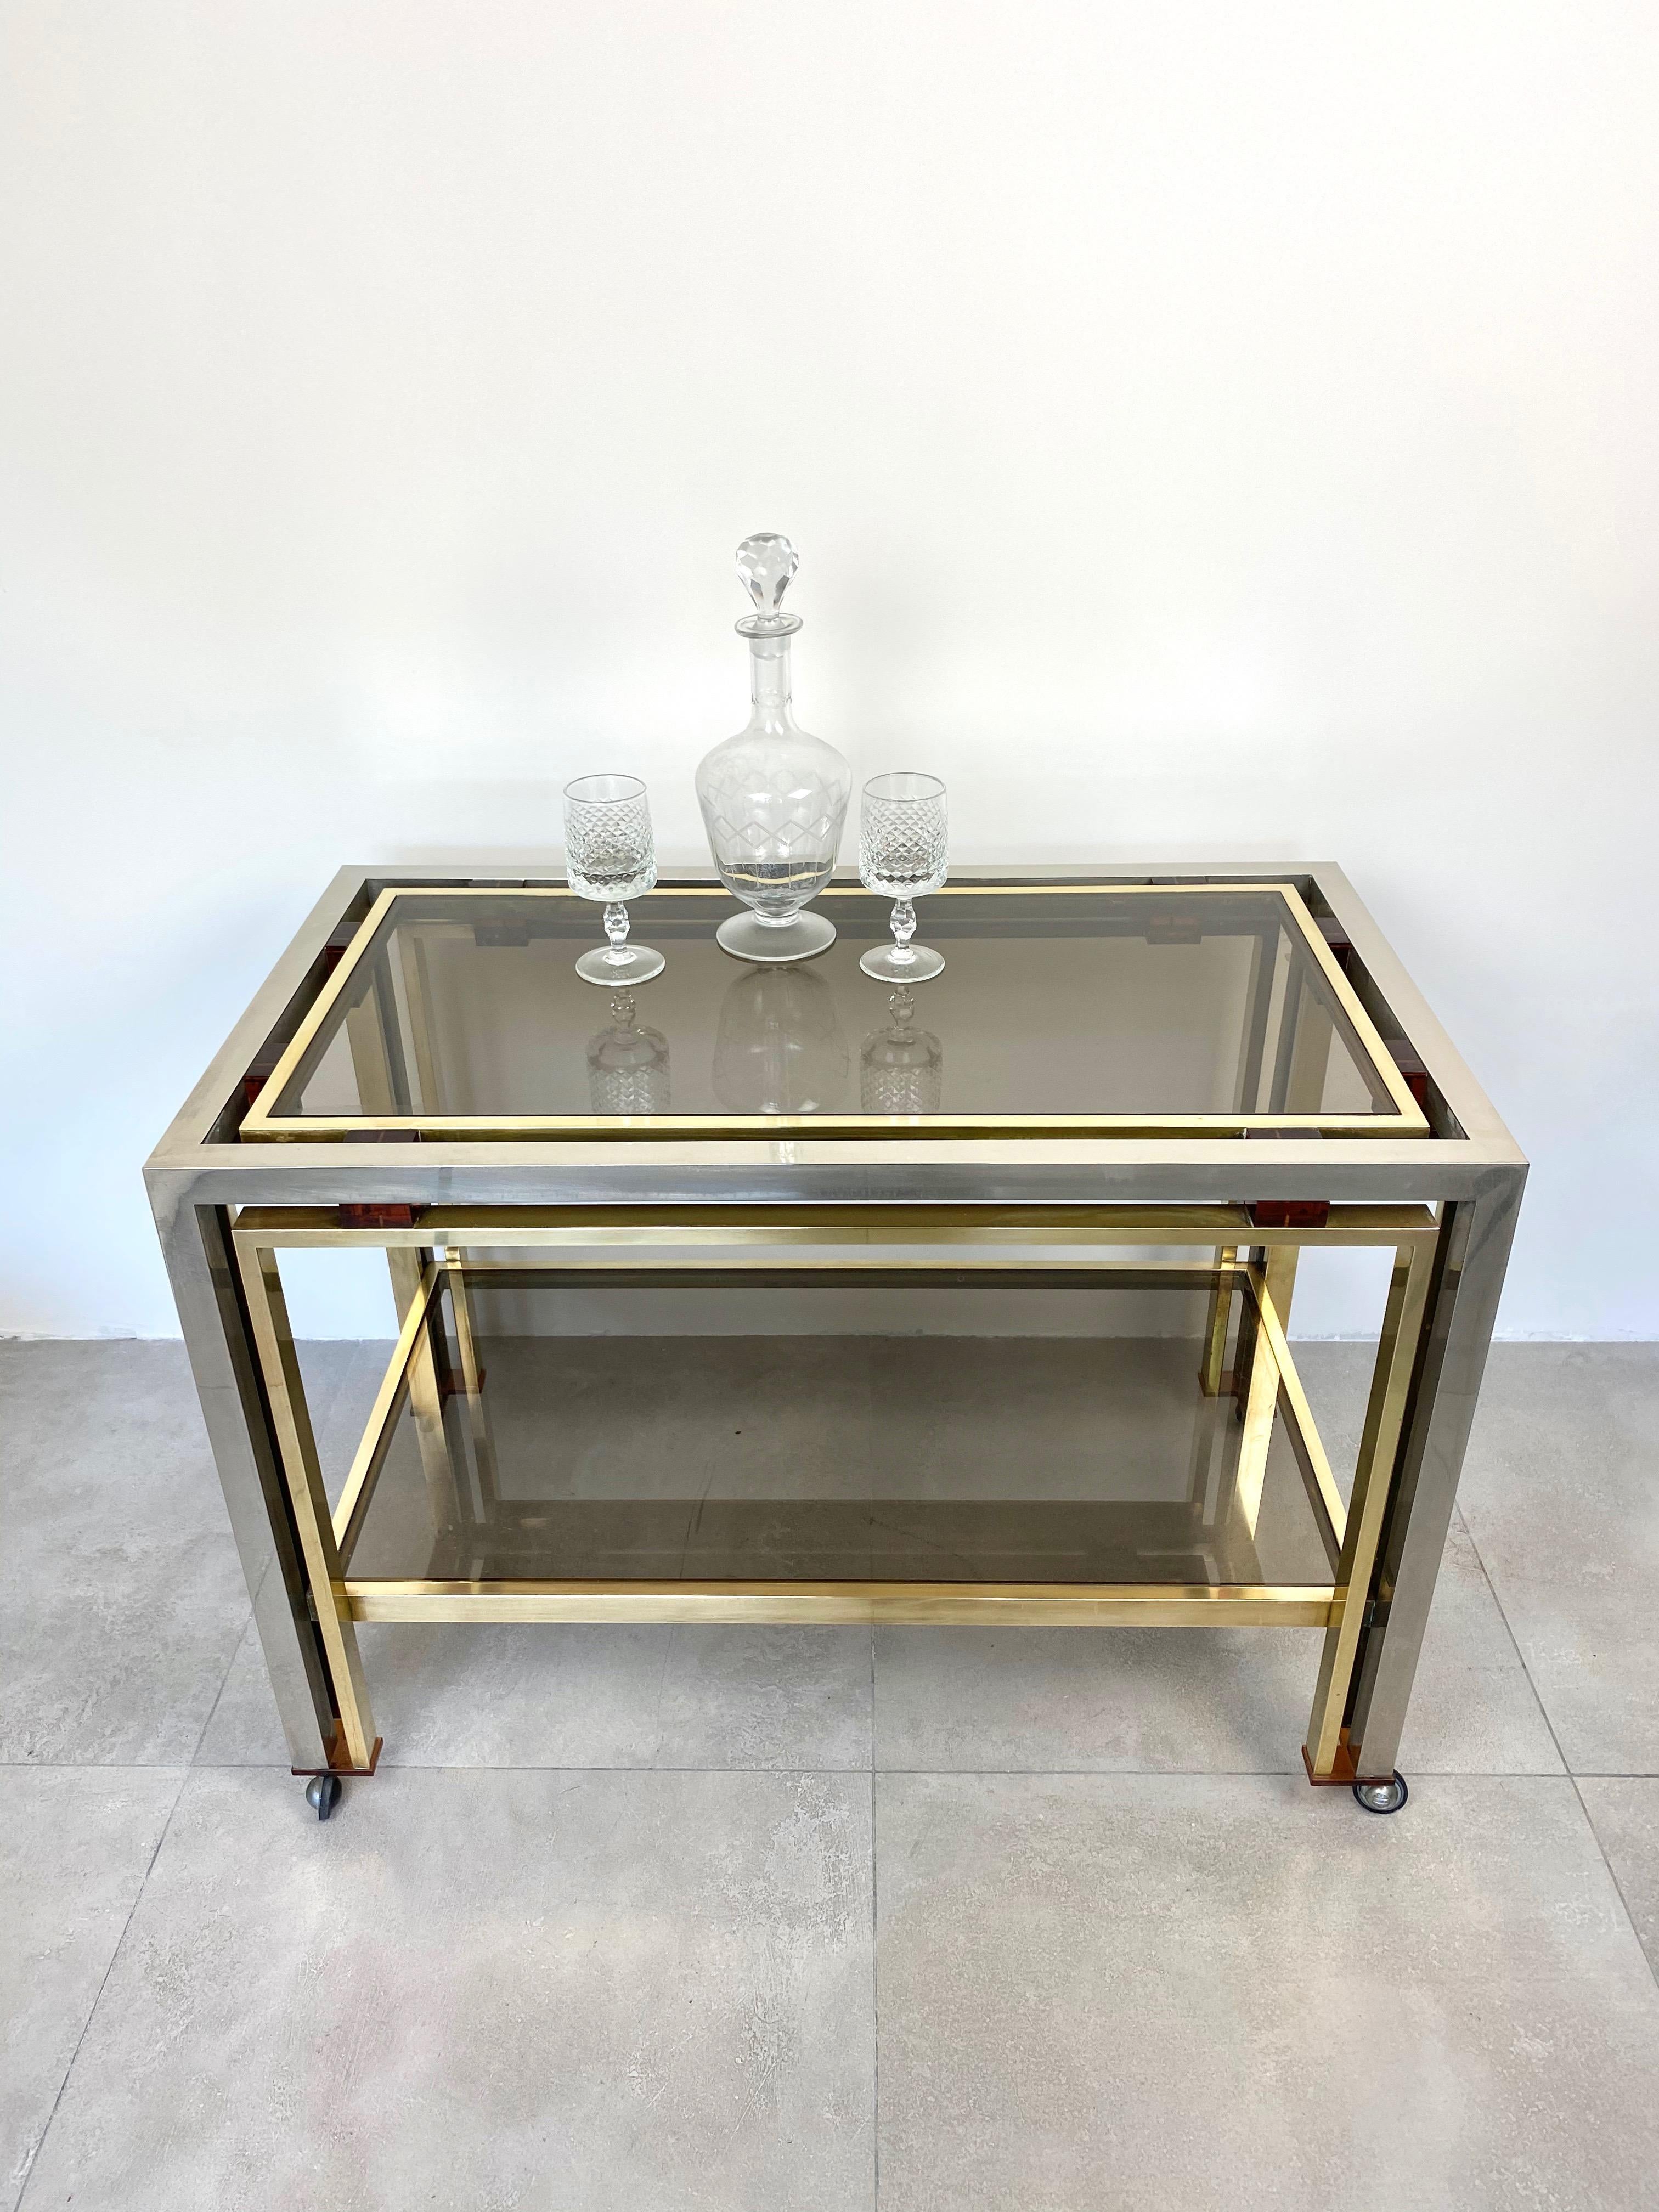 Italian Romeo Rega Cart Table in Chrome, Lucite and Brass, Italy, 1970s For Sale